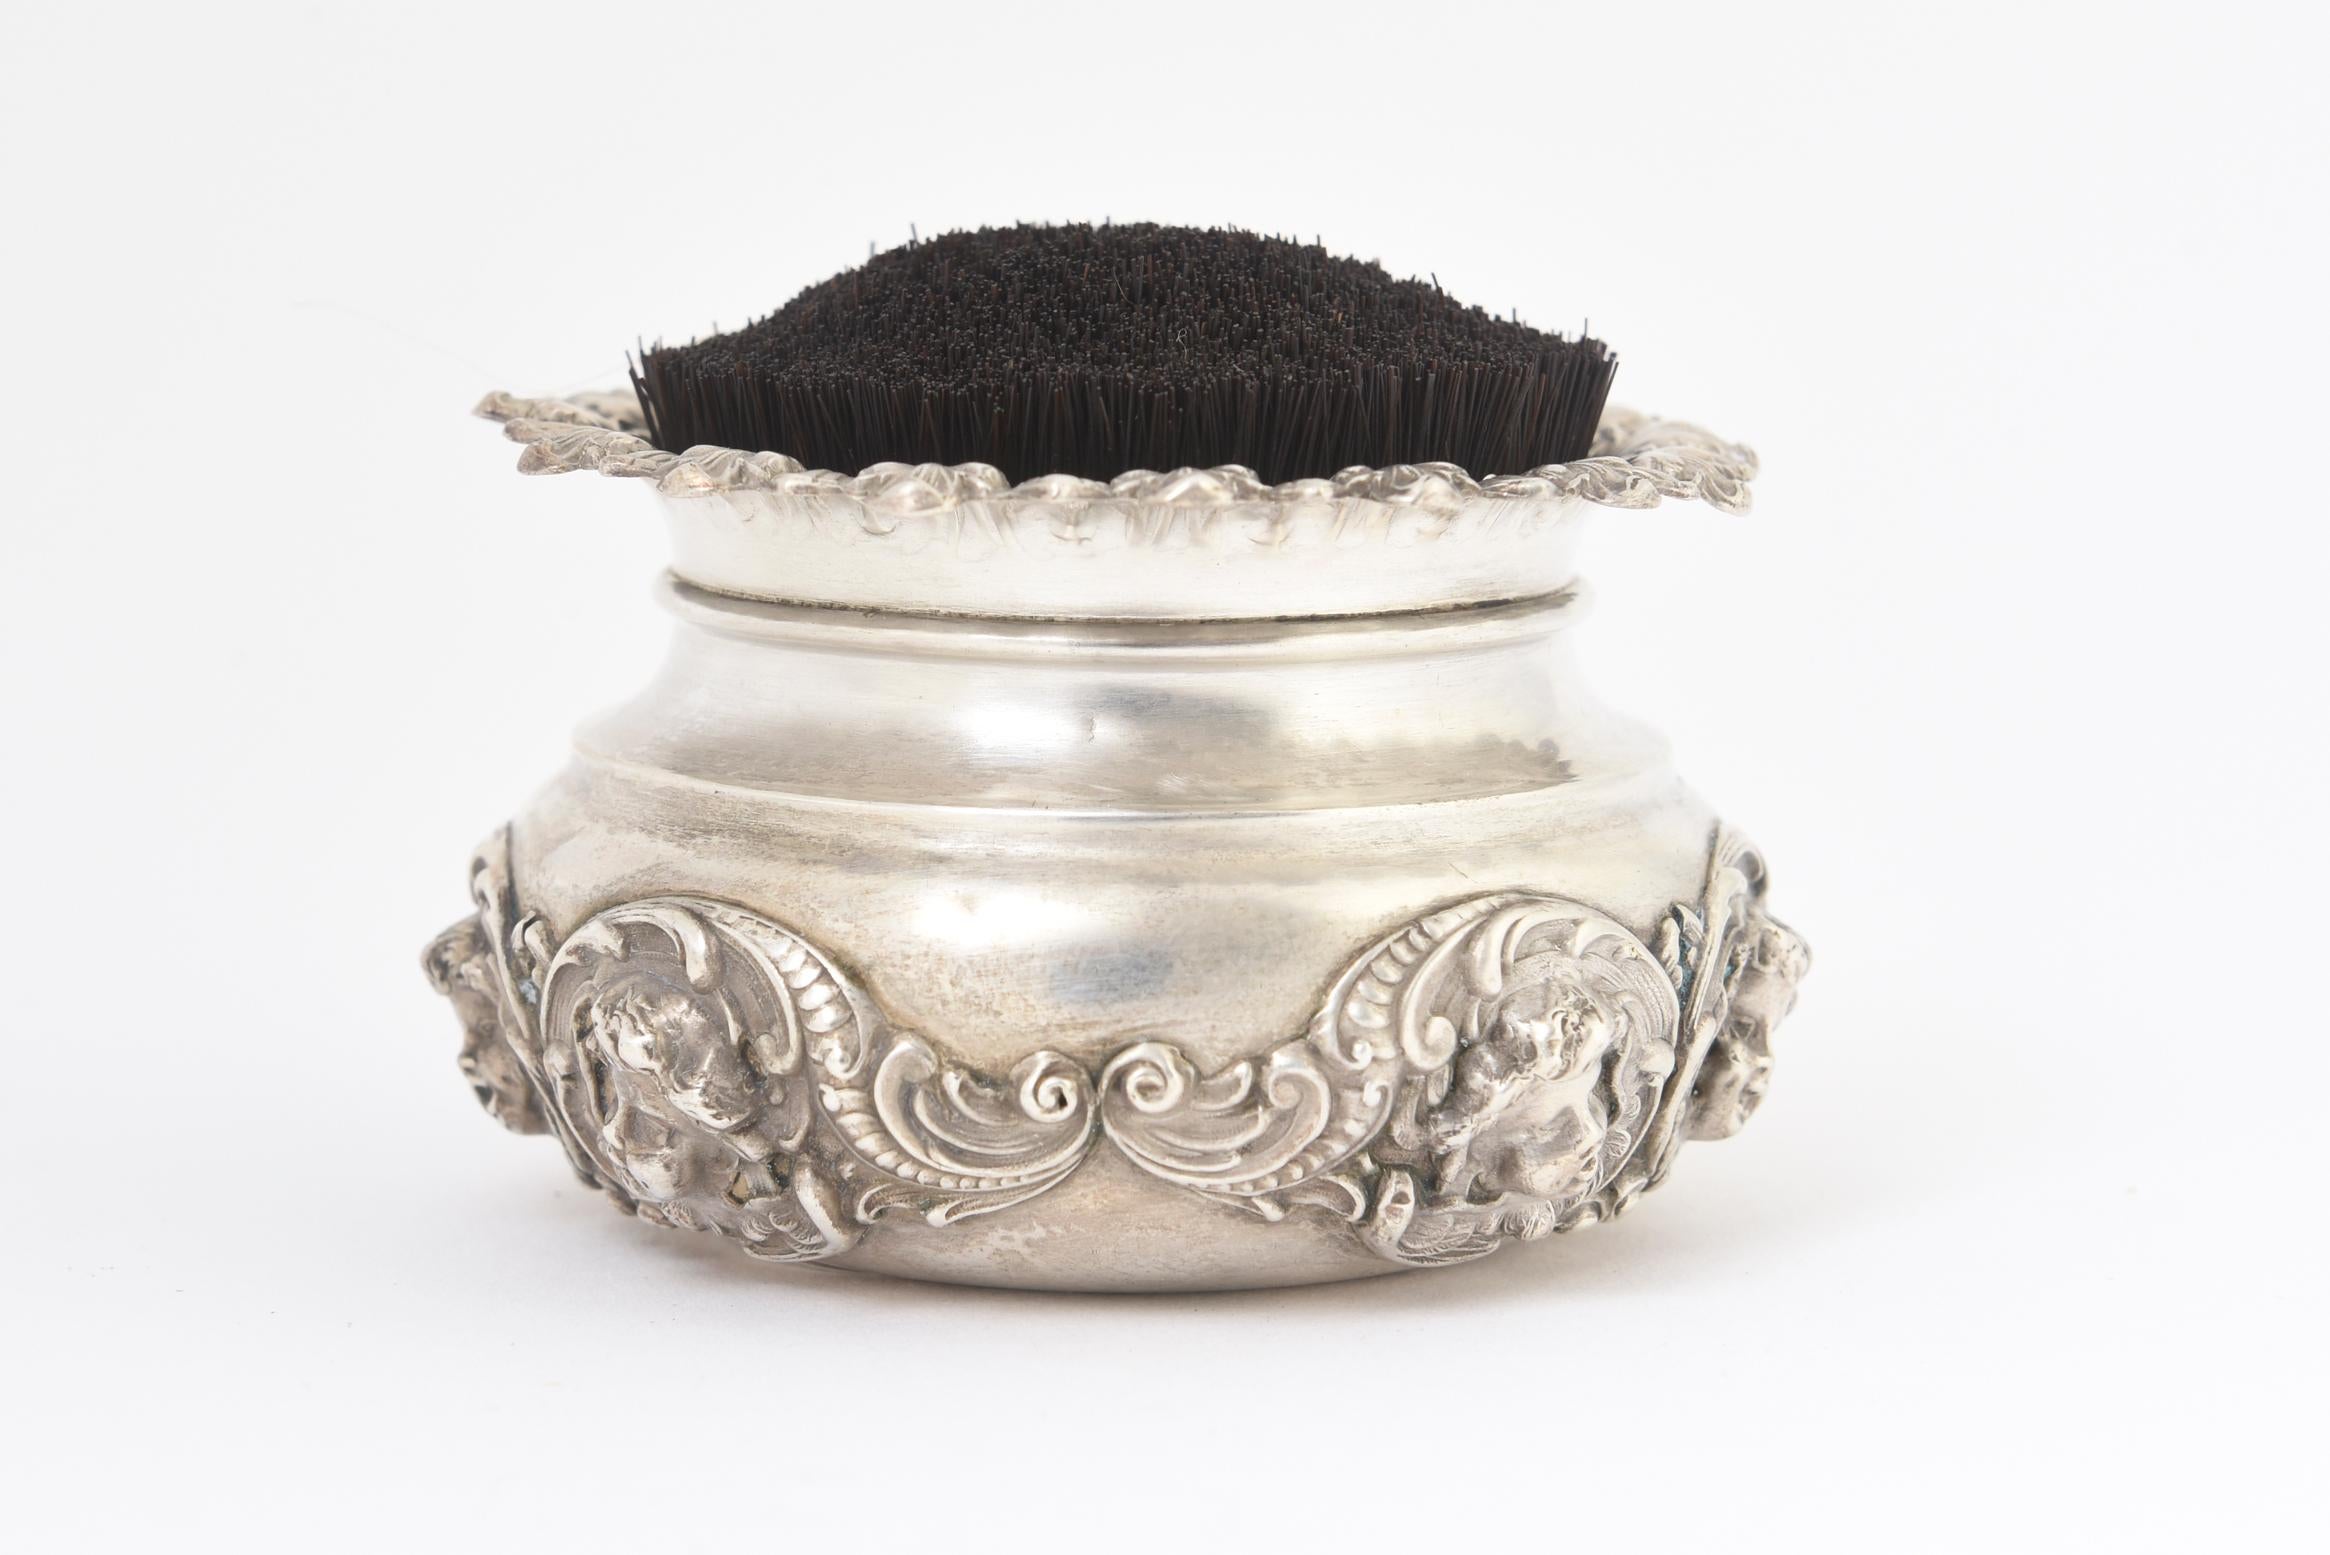 Late 19th century sterling silver cherub clothing brush by William B. Kerr & Co. Newark, New Jersey. Marked 